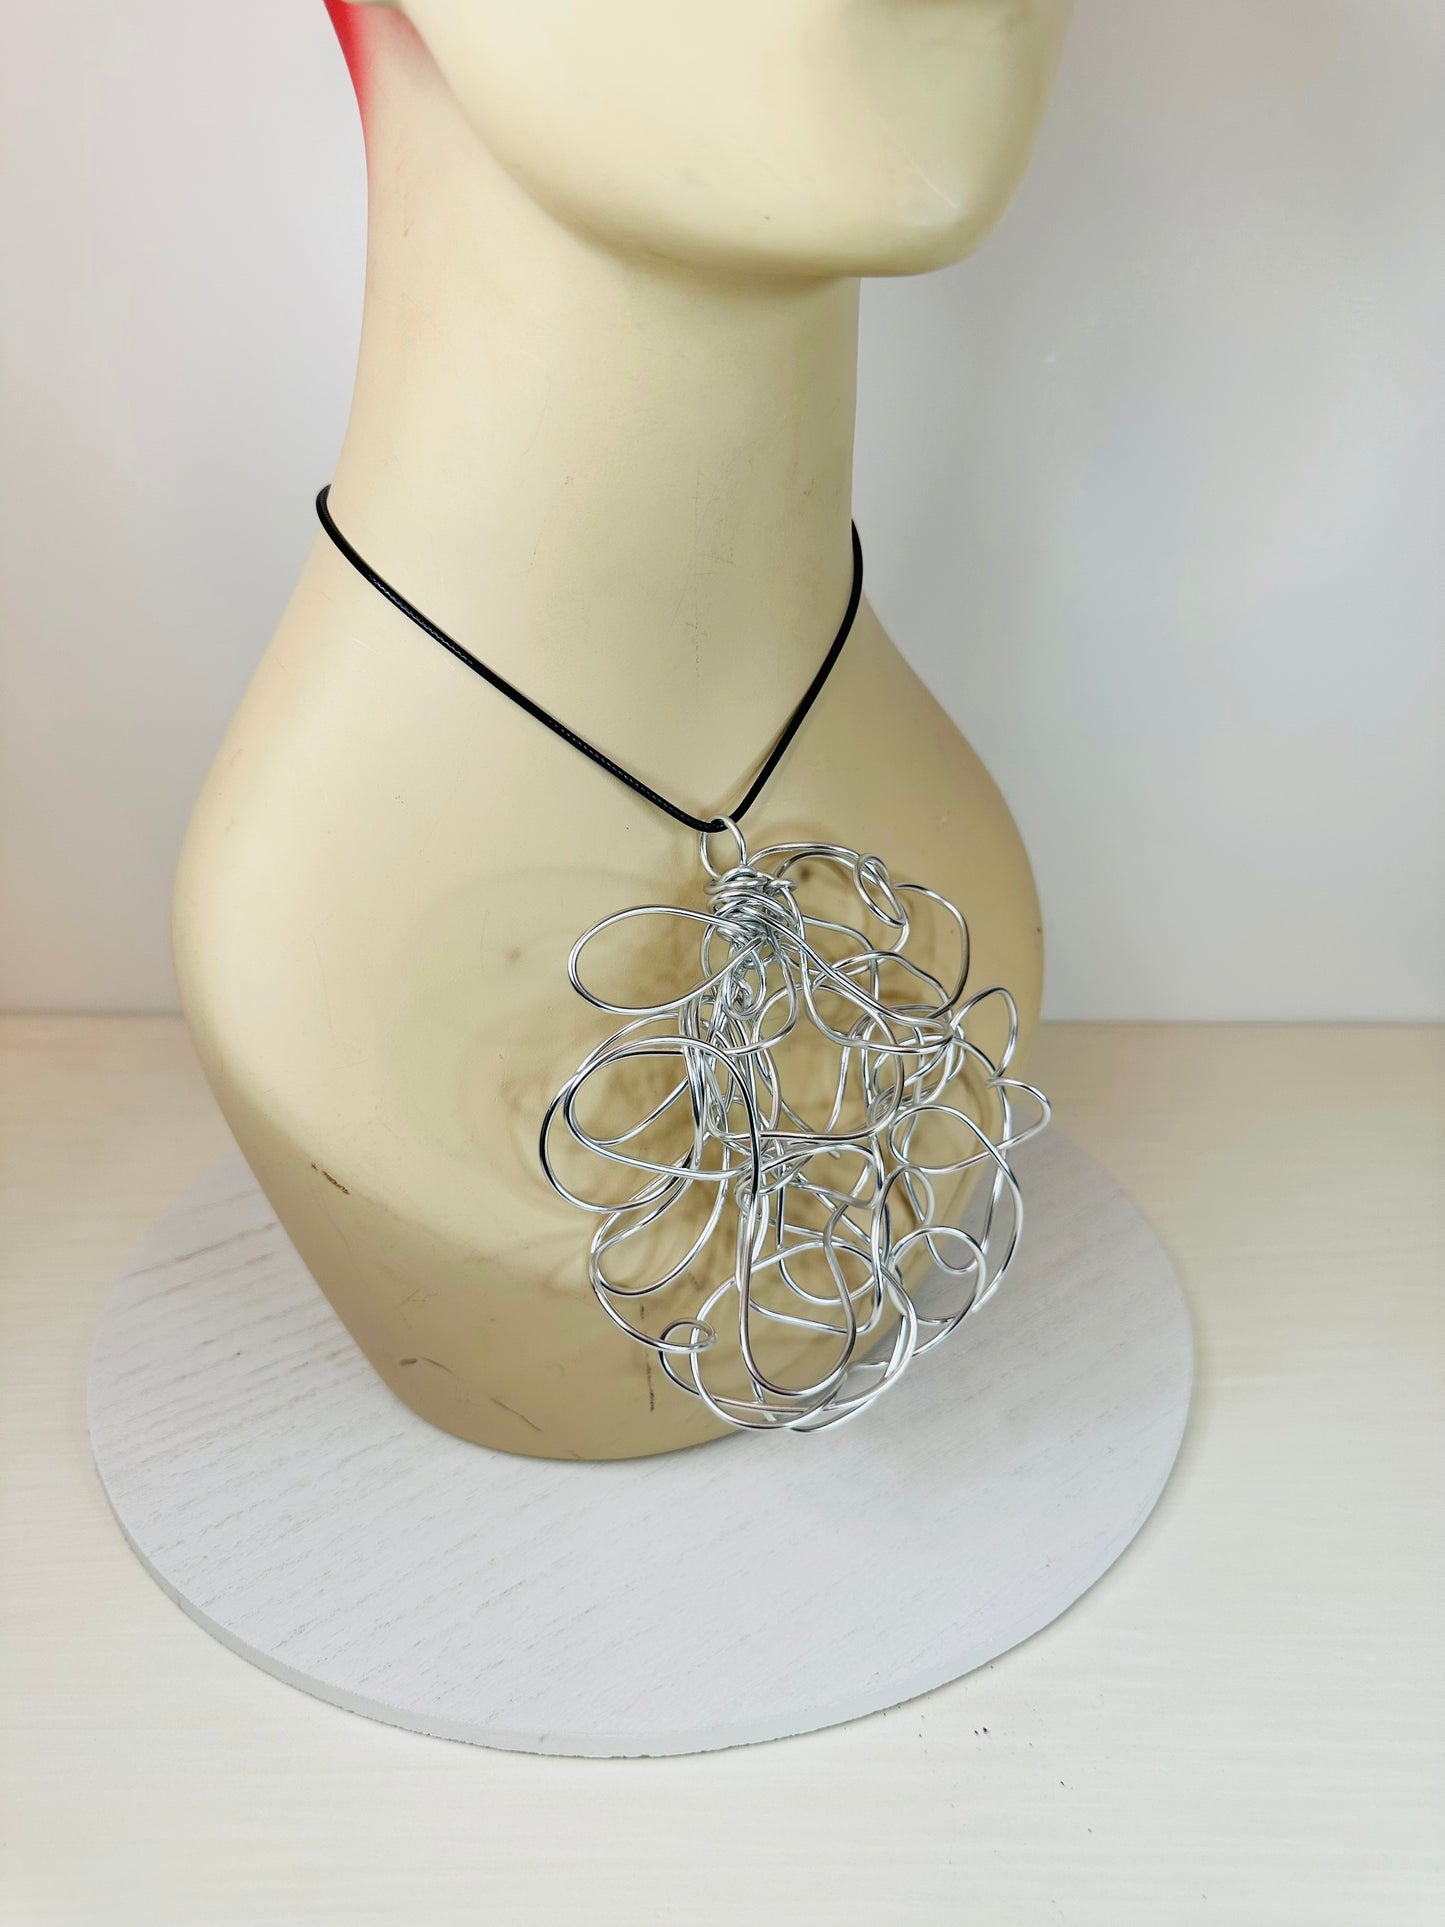 Abstract 3D Necklace - Silver